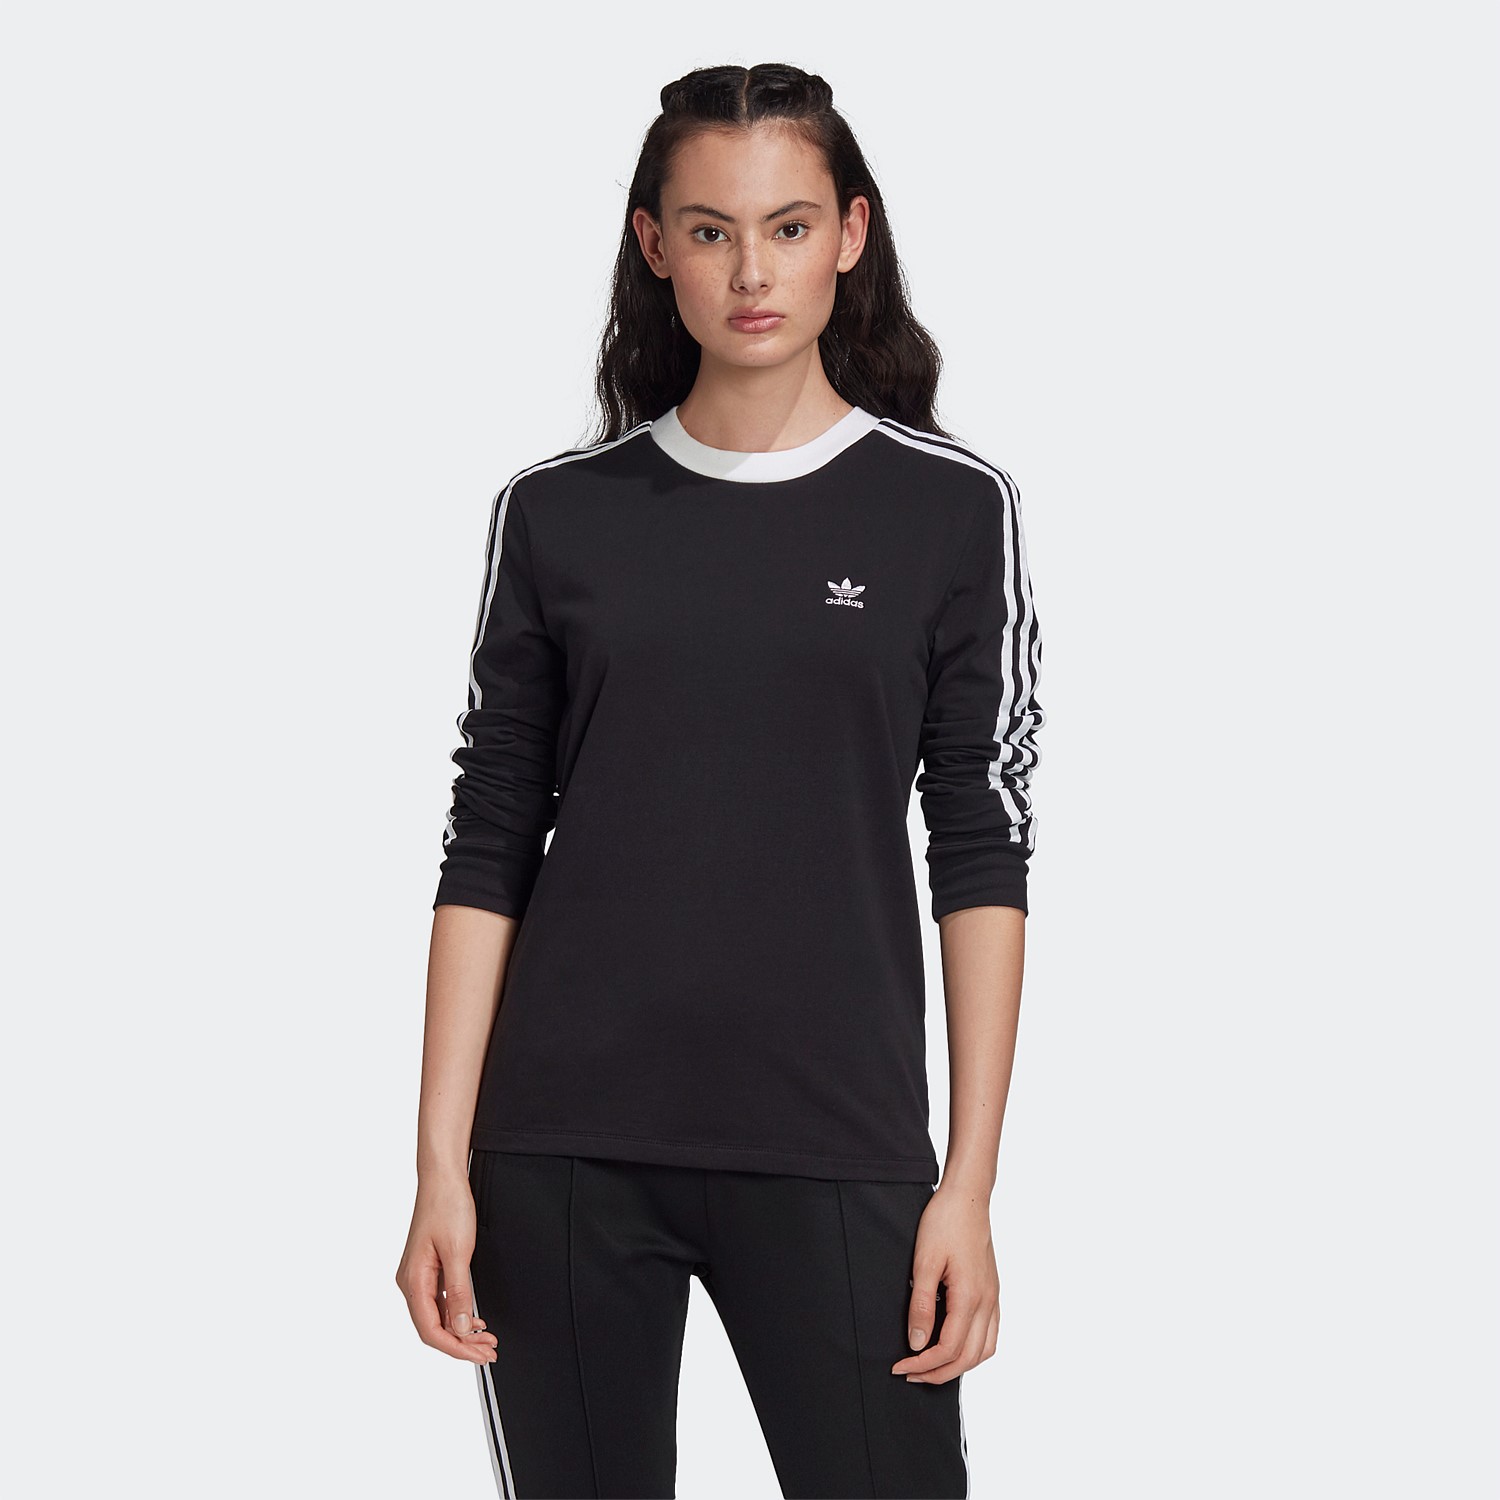 three striped long sleeve top by adidas